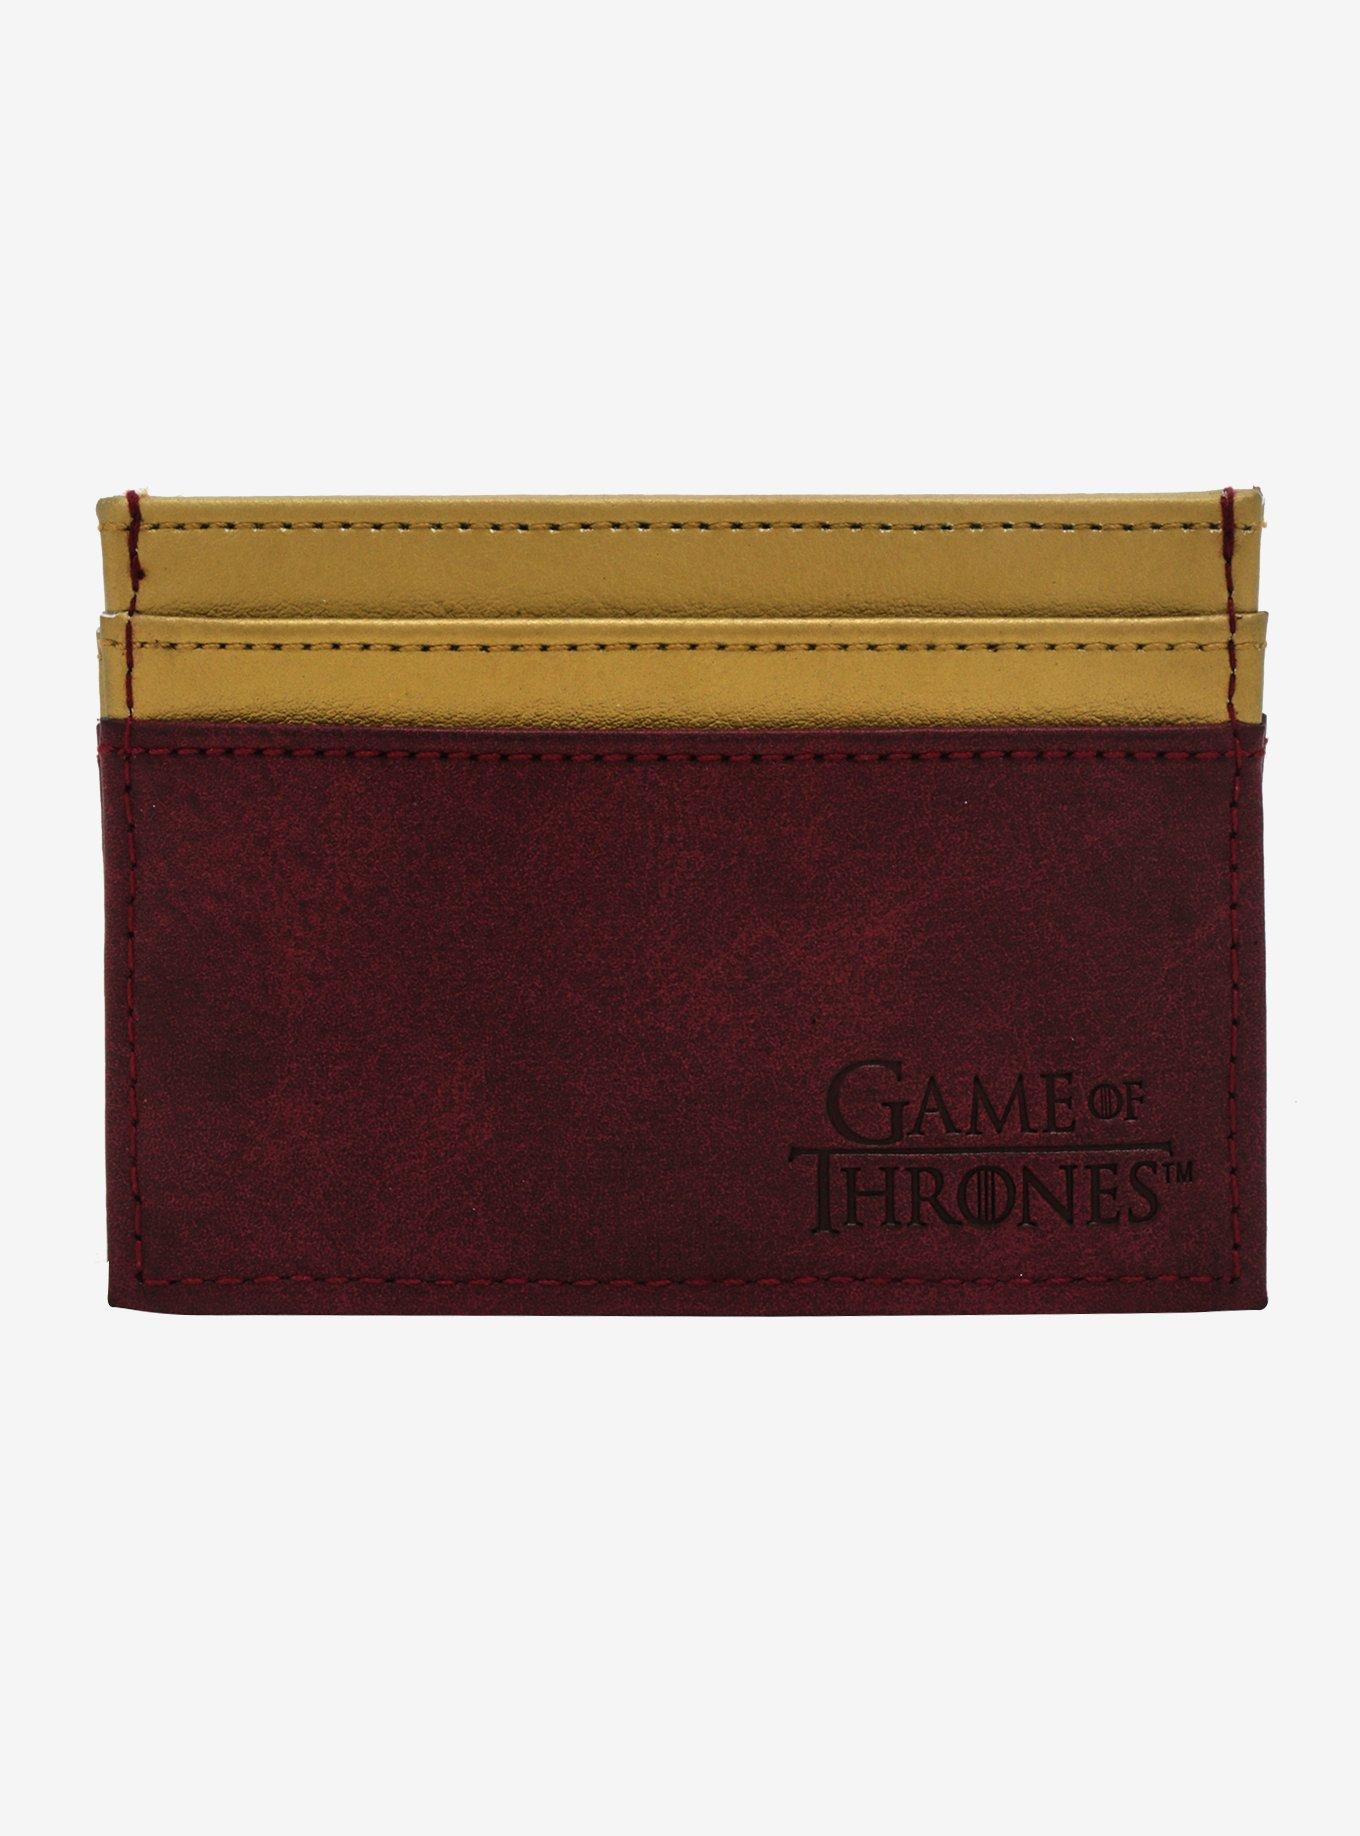 Game Of Thrones Tyrion Lannister Cardholder - BoxLunch Exclusive, , alternate